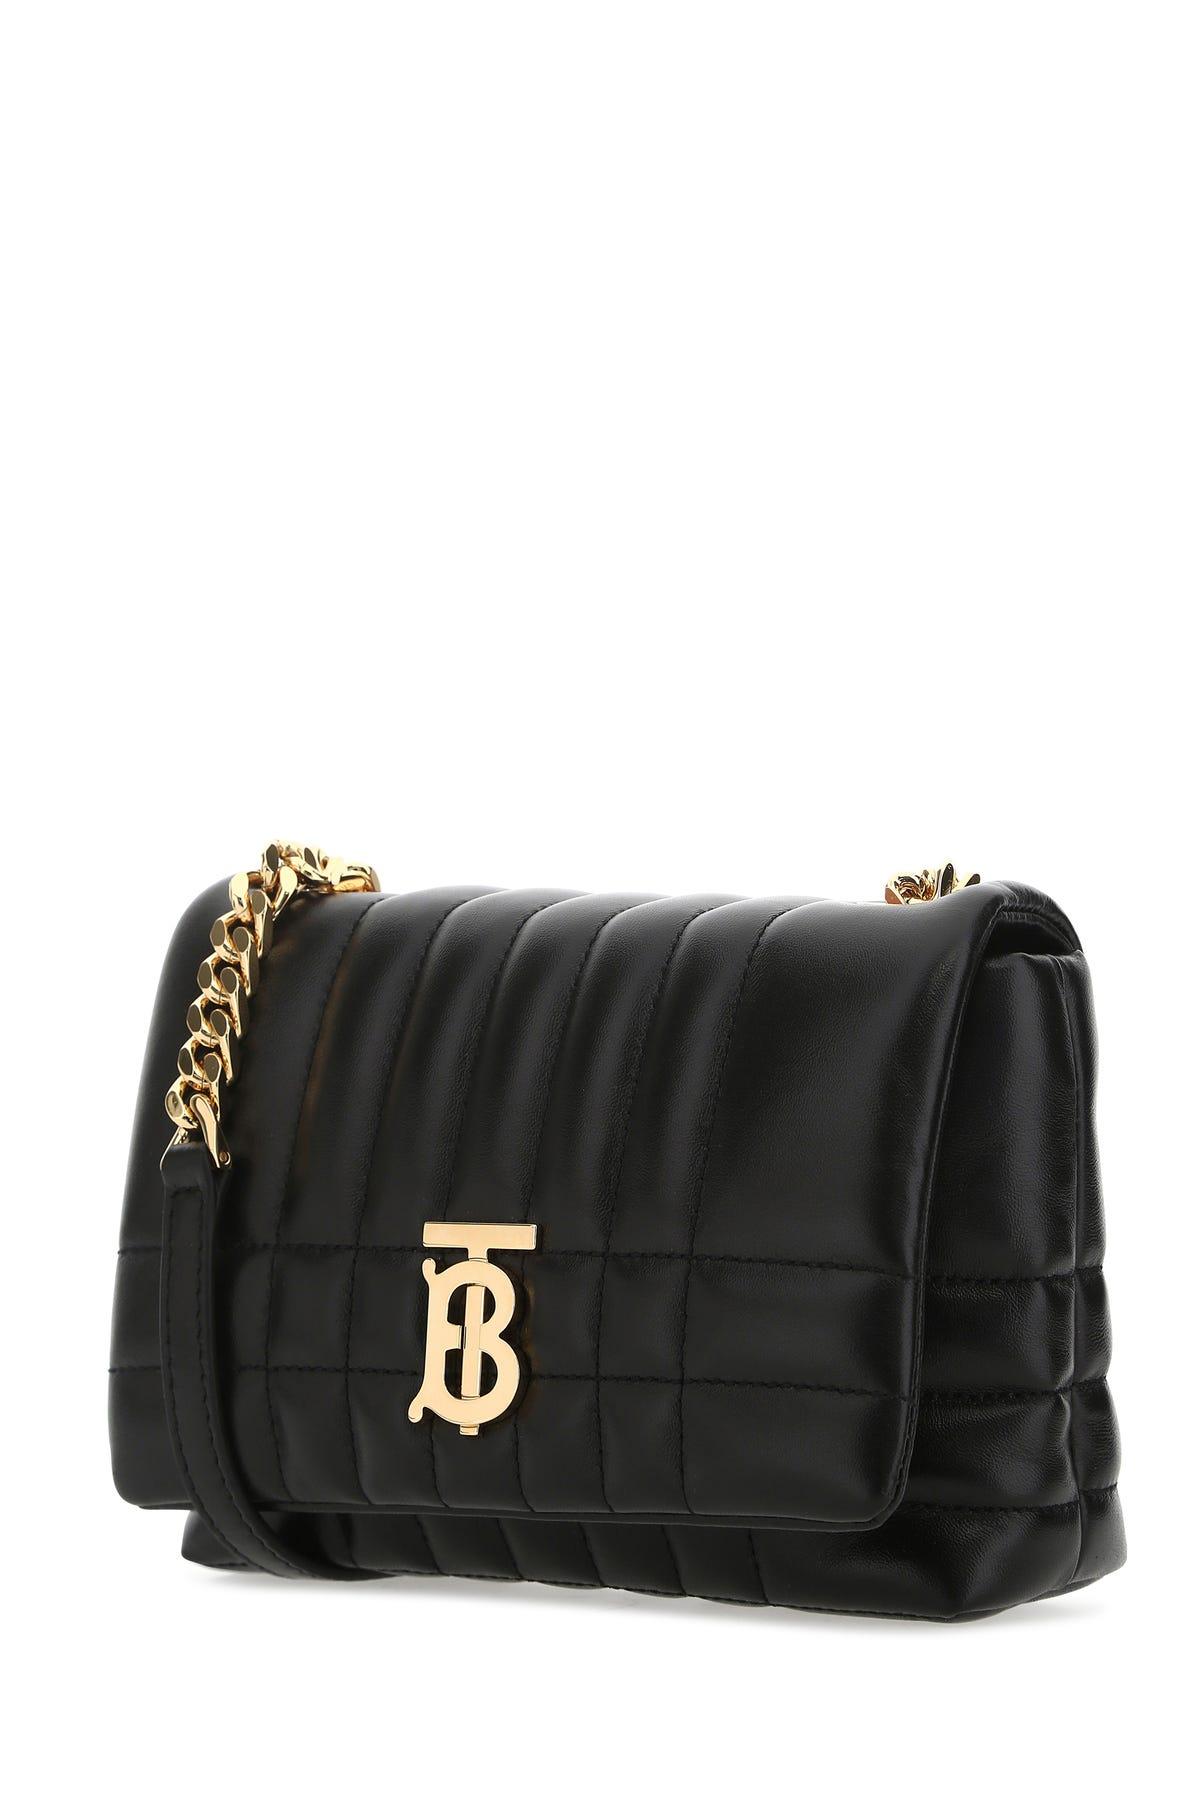 Burberry Lola Quilted Leather Small Bag Black